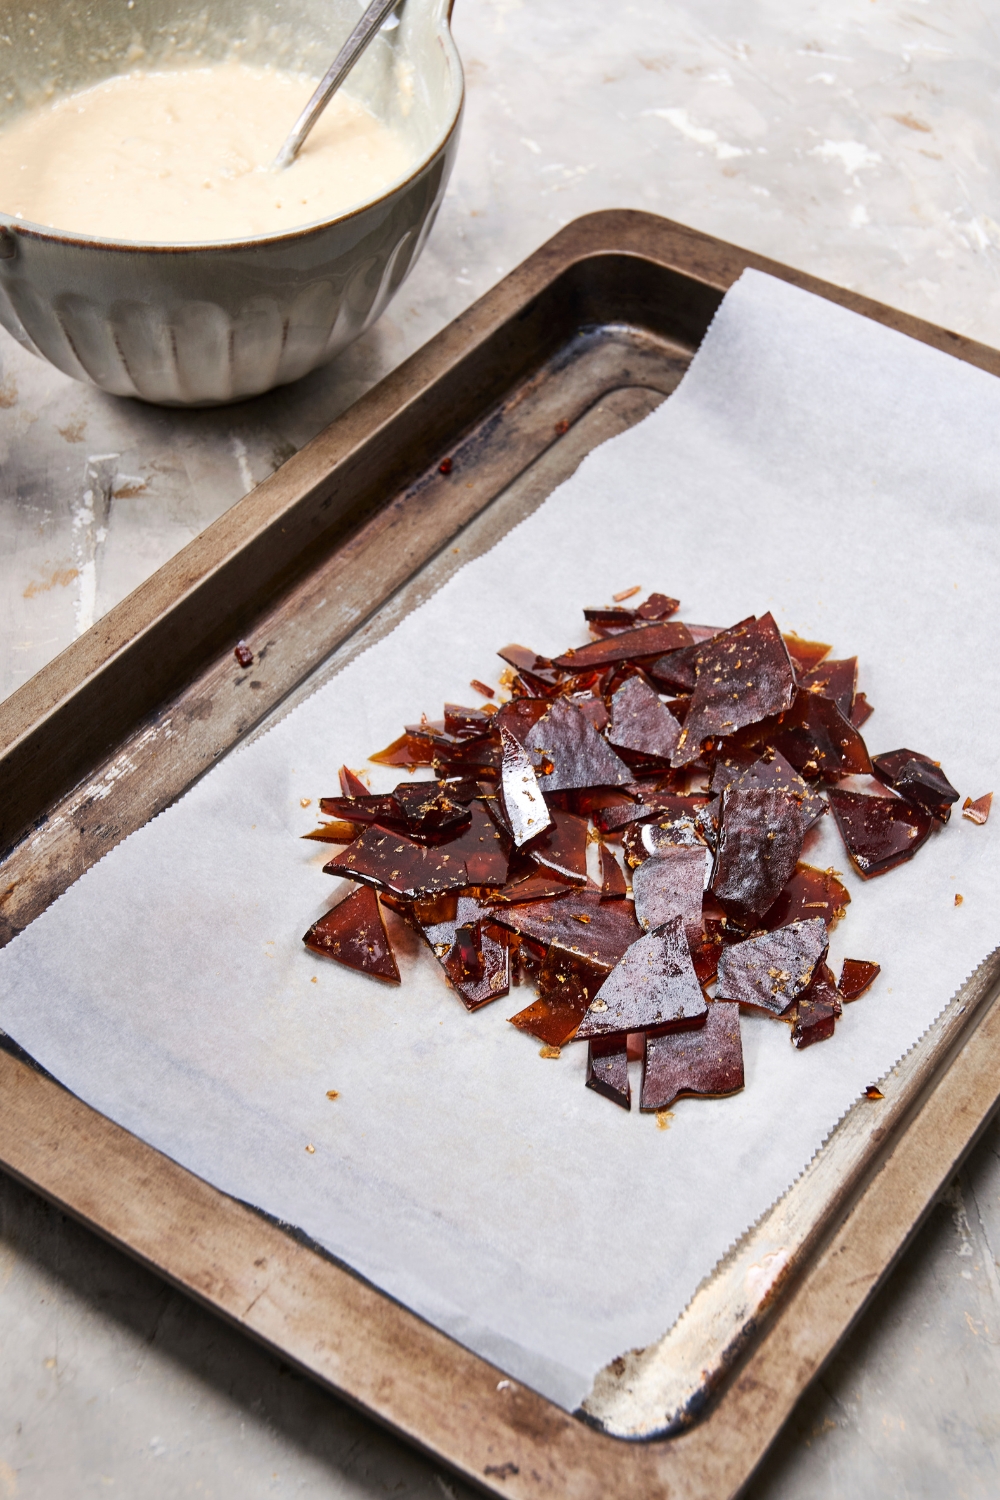 Shards of maple syrup are piled on a parchment paper lined baking sheet.